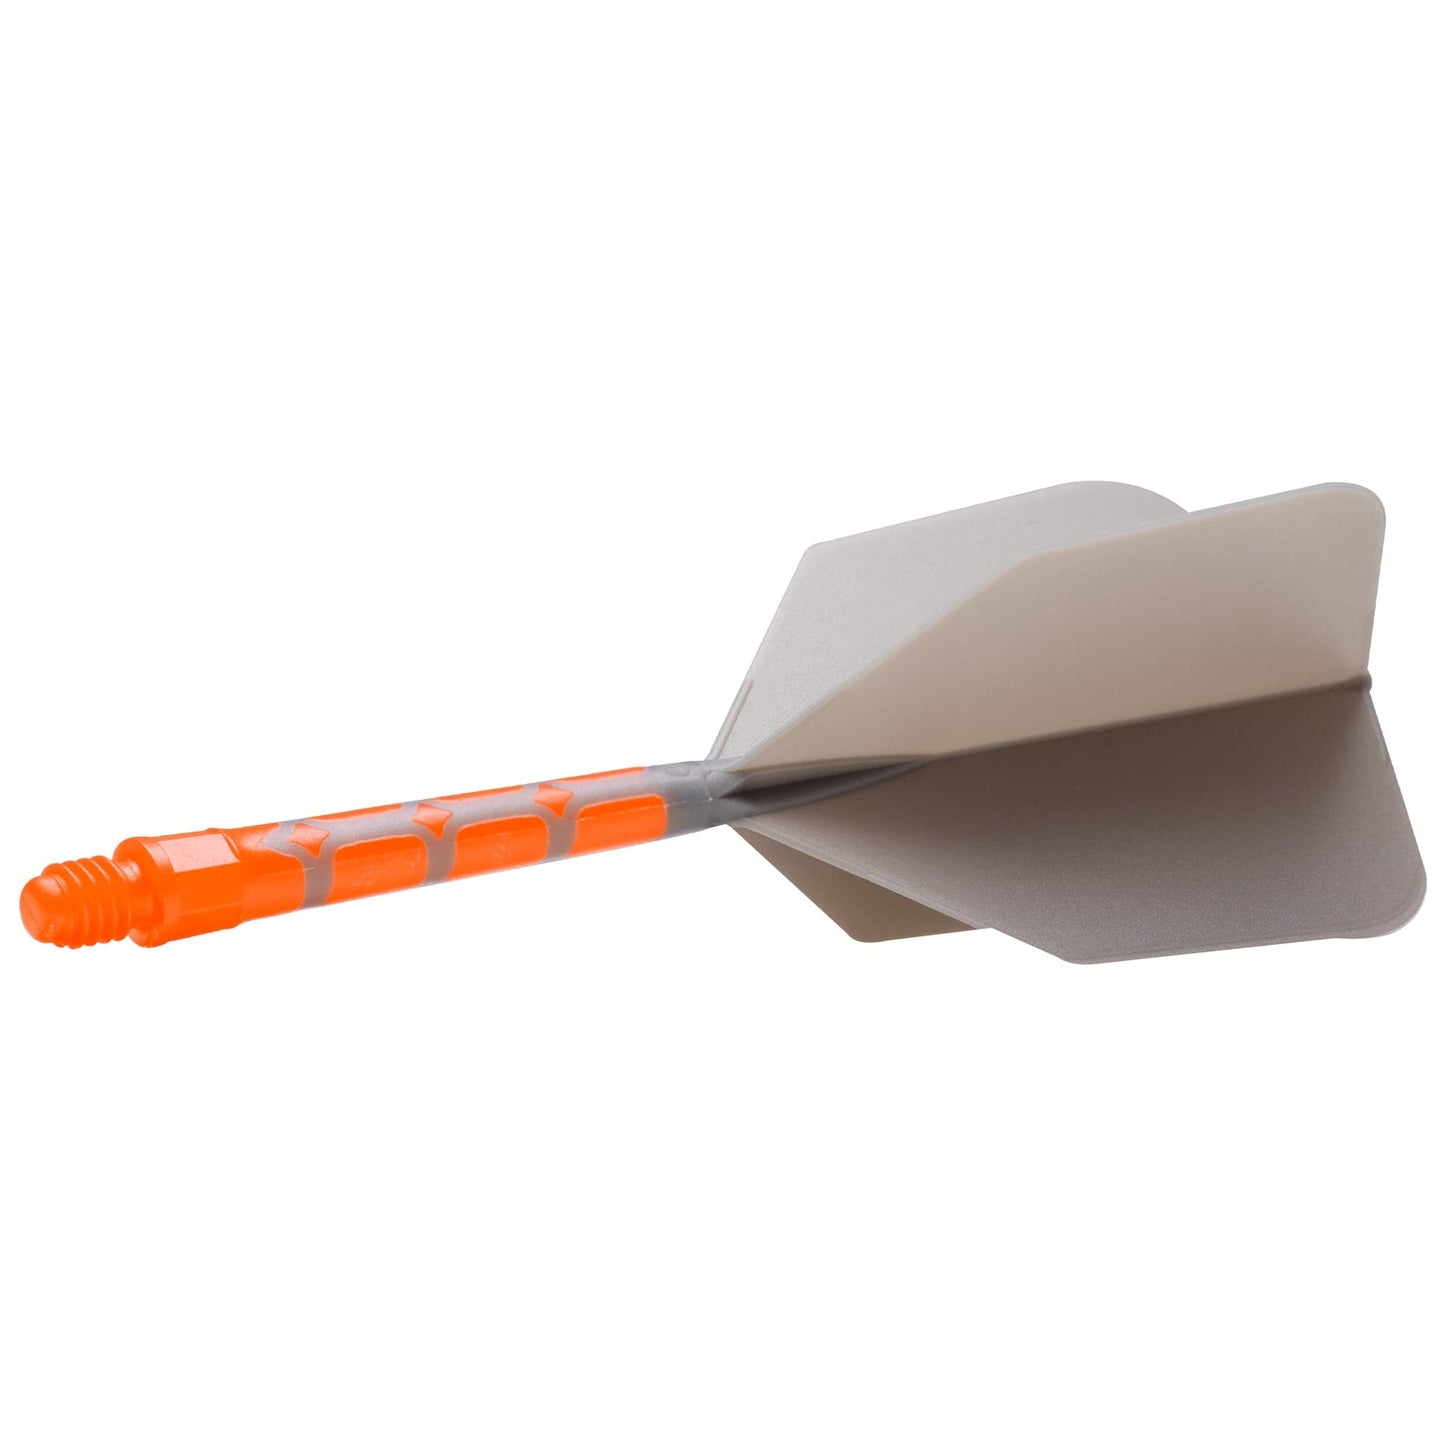 Cuesoul Rost T19 Integrated Dart Shaft and Flights - Big Wing - Orange with Grey Flight